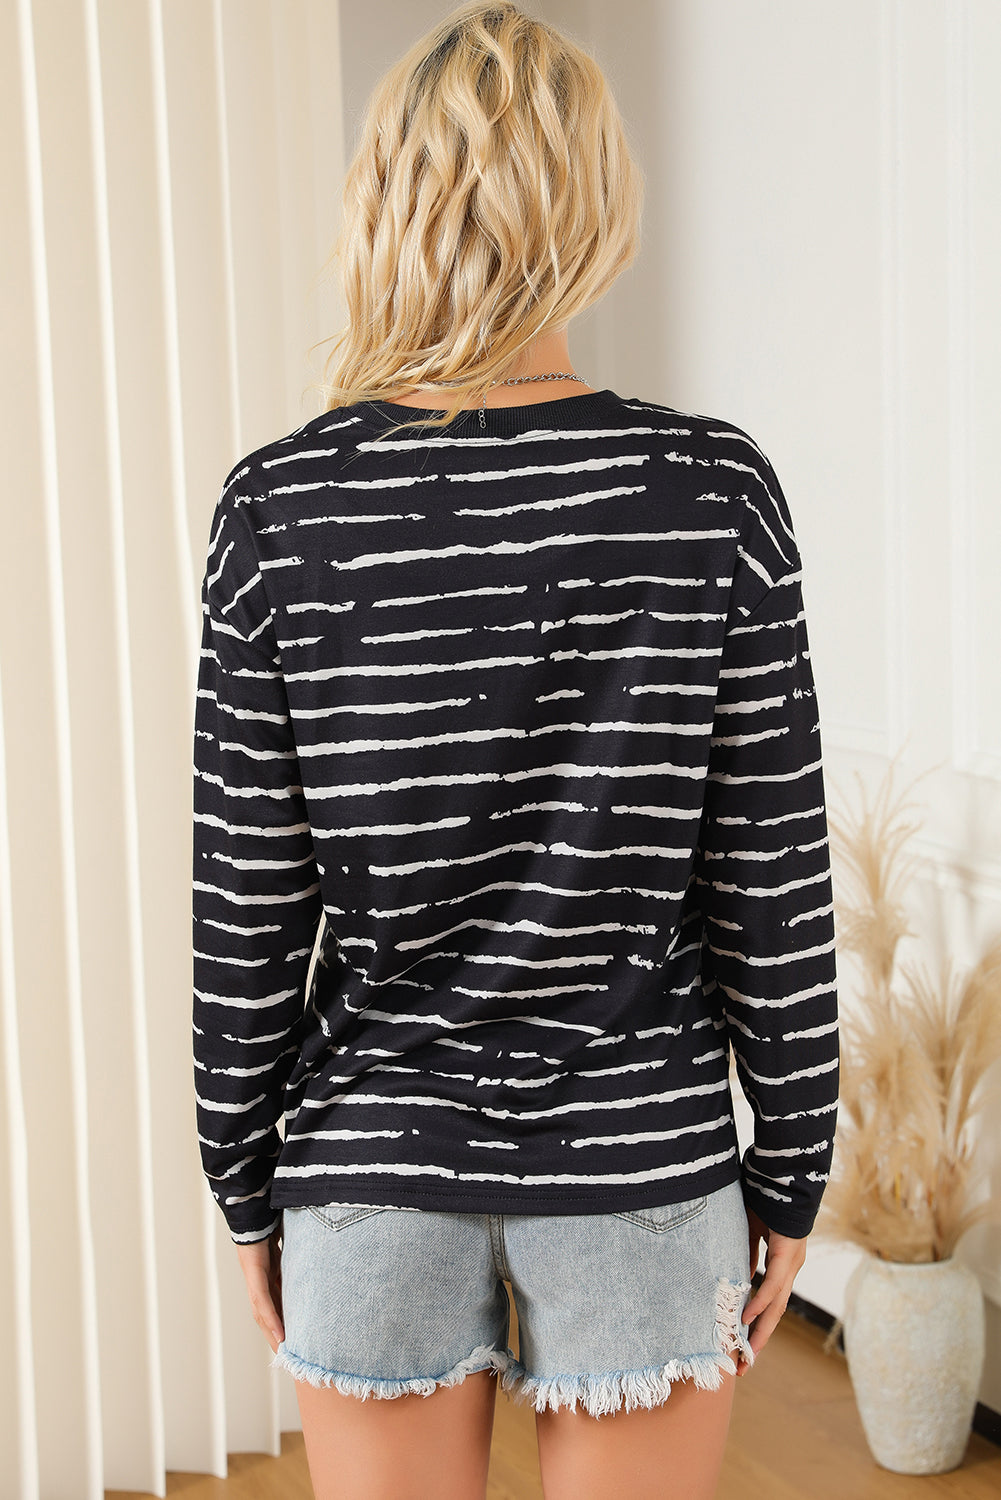 White Retro Striped Casual Long Sleeve Top